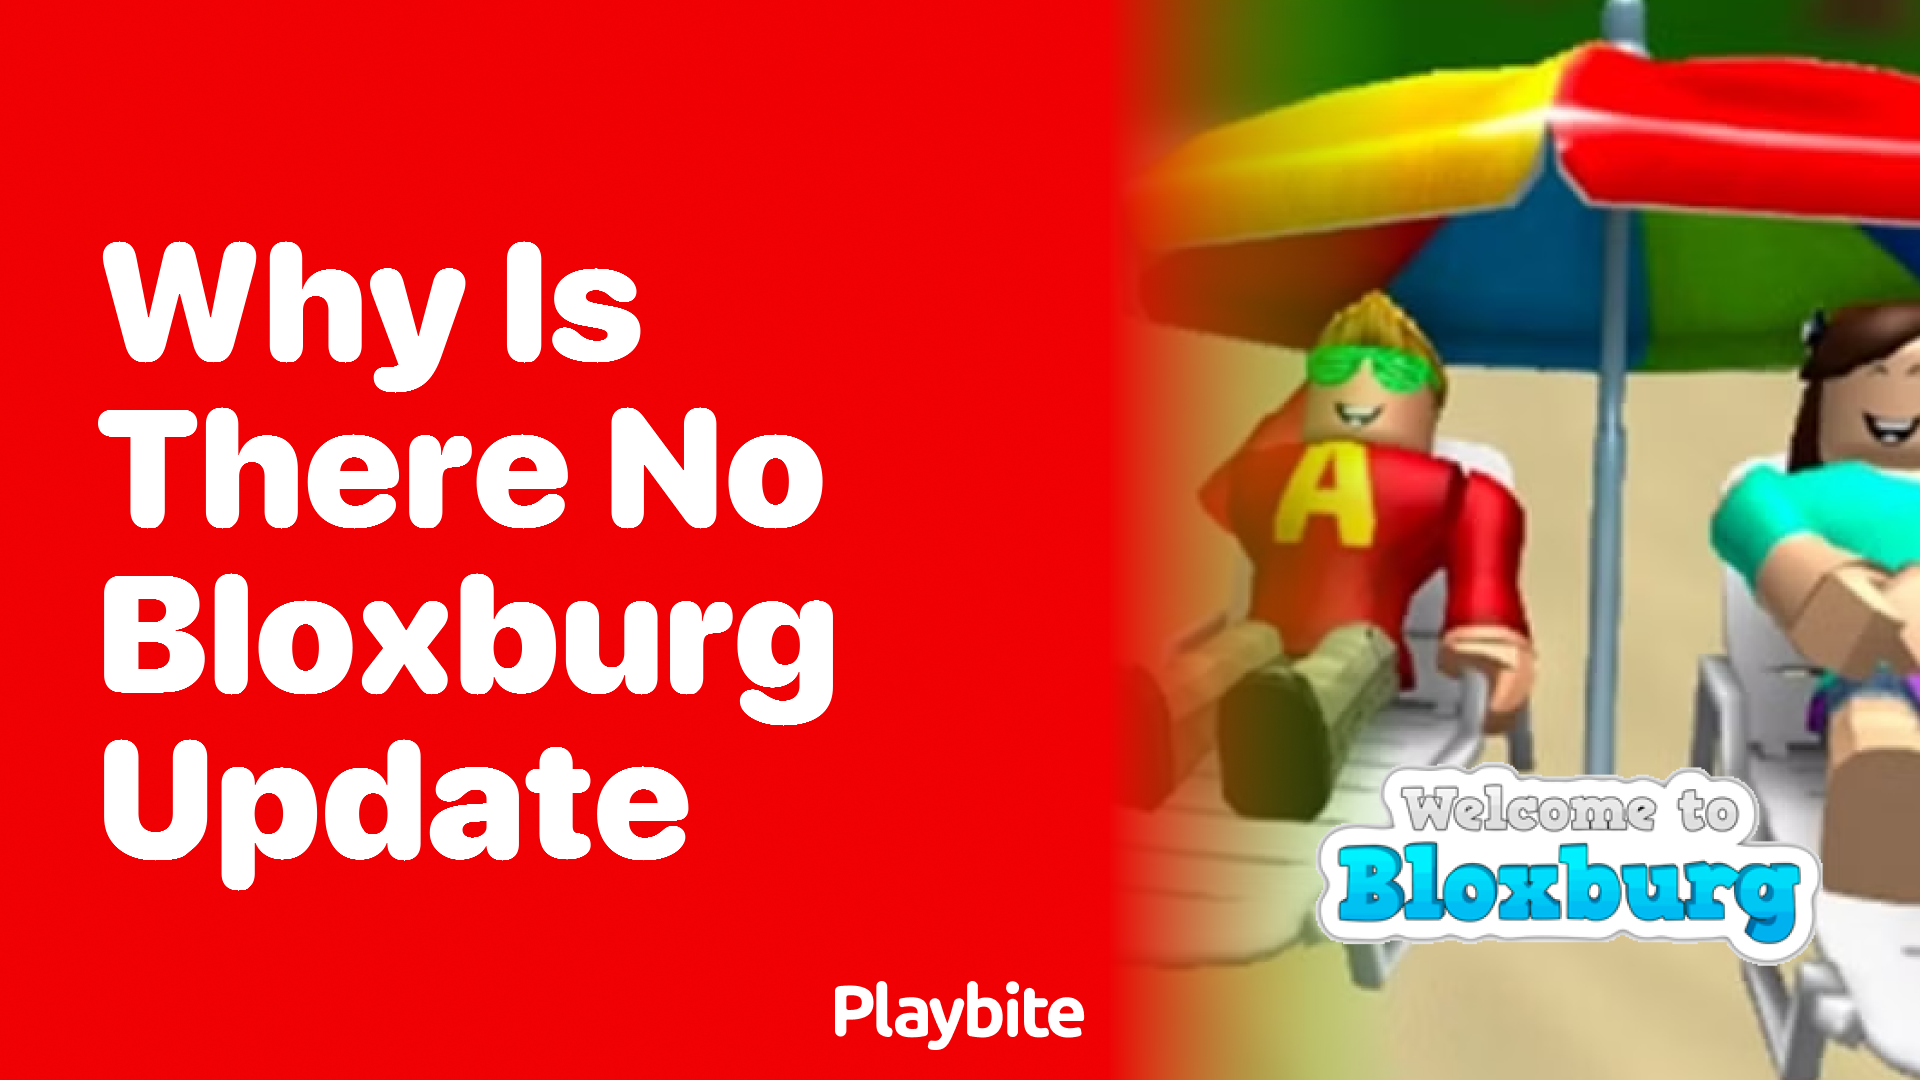 Why Is There No Bloxburg Update?